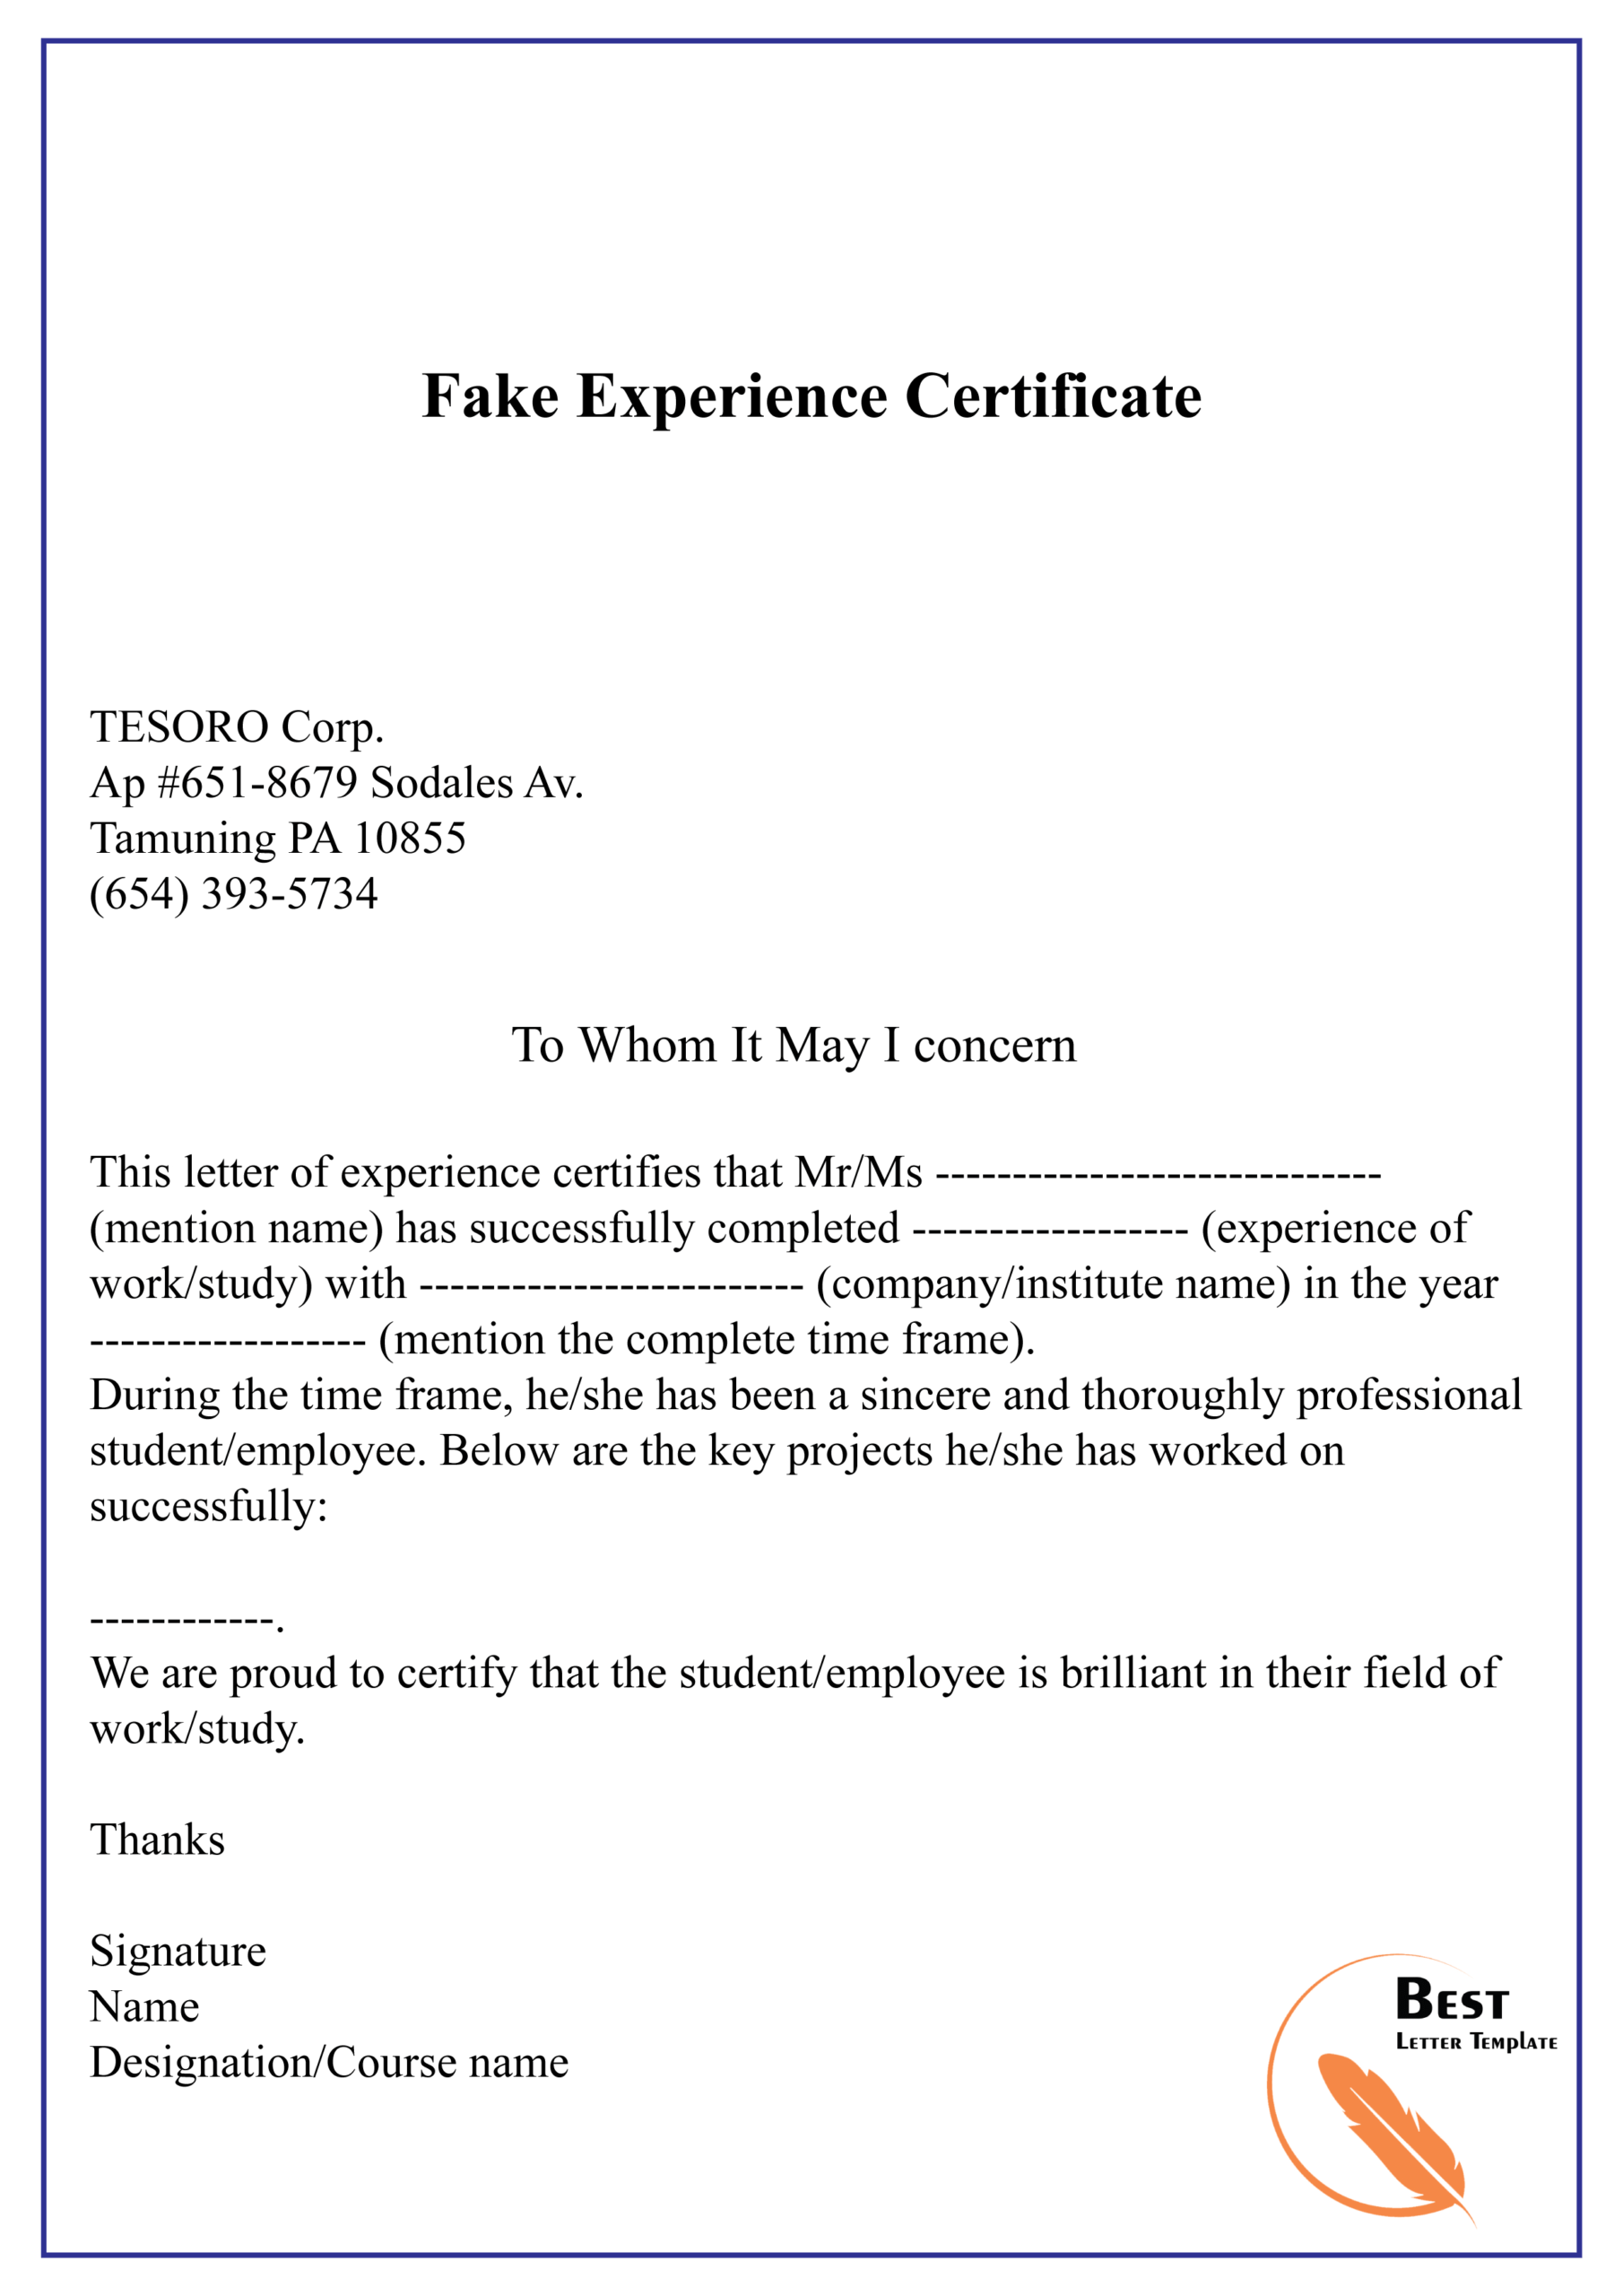 Fake Experience Certificate 01 | Best Letter Template For Certificate Of Experience Template